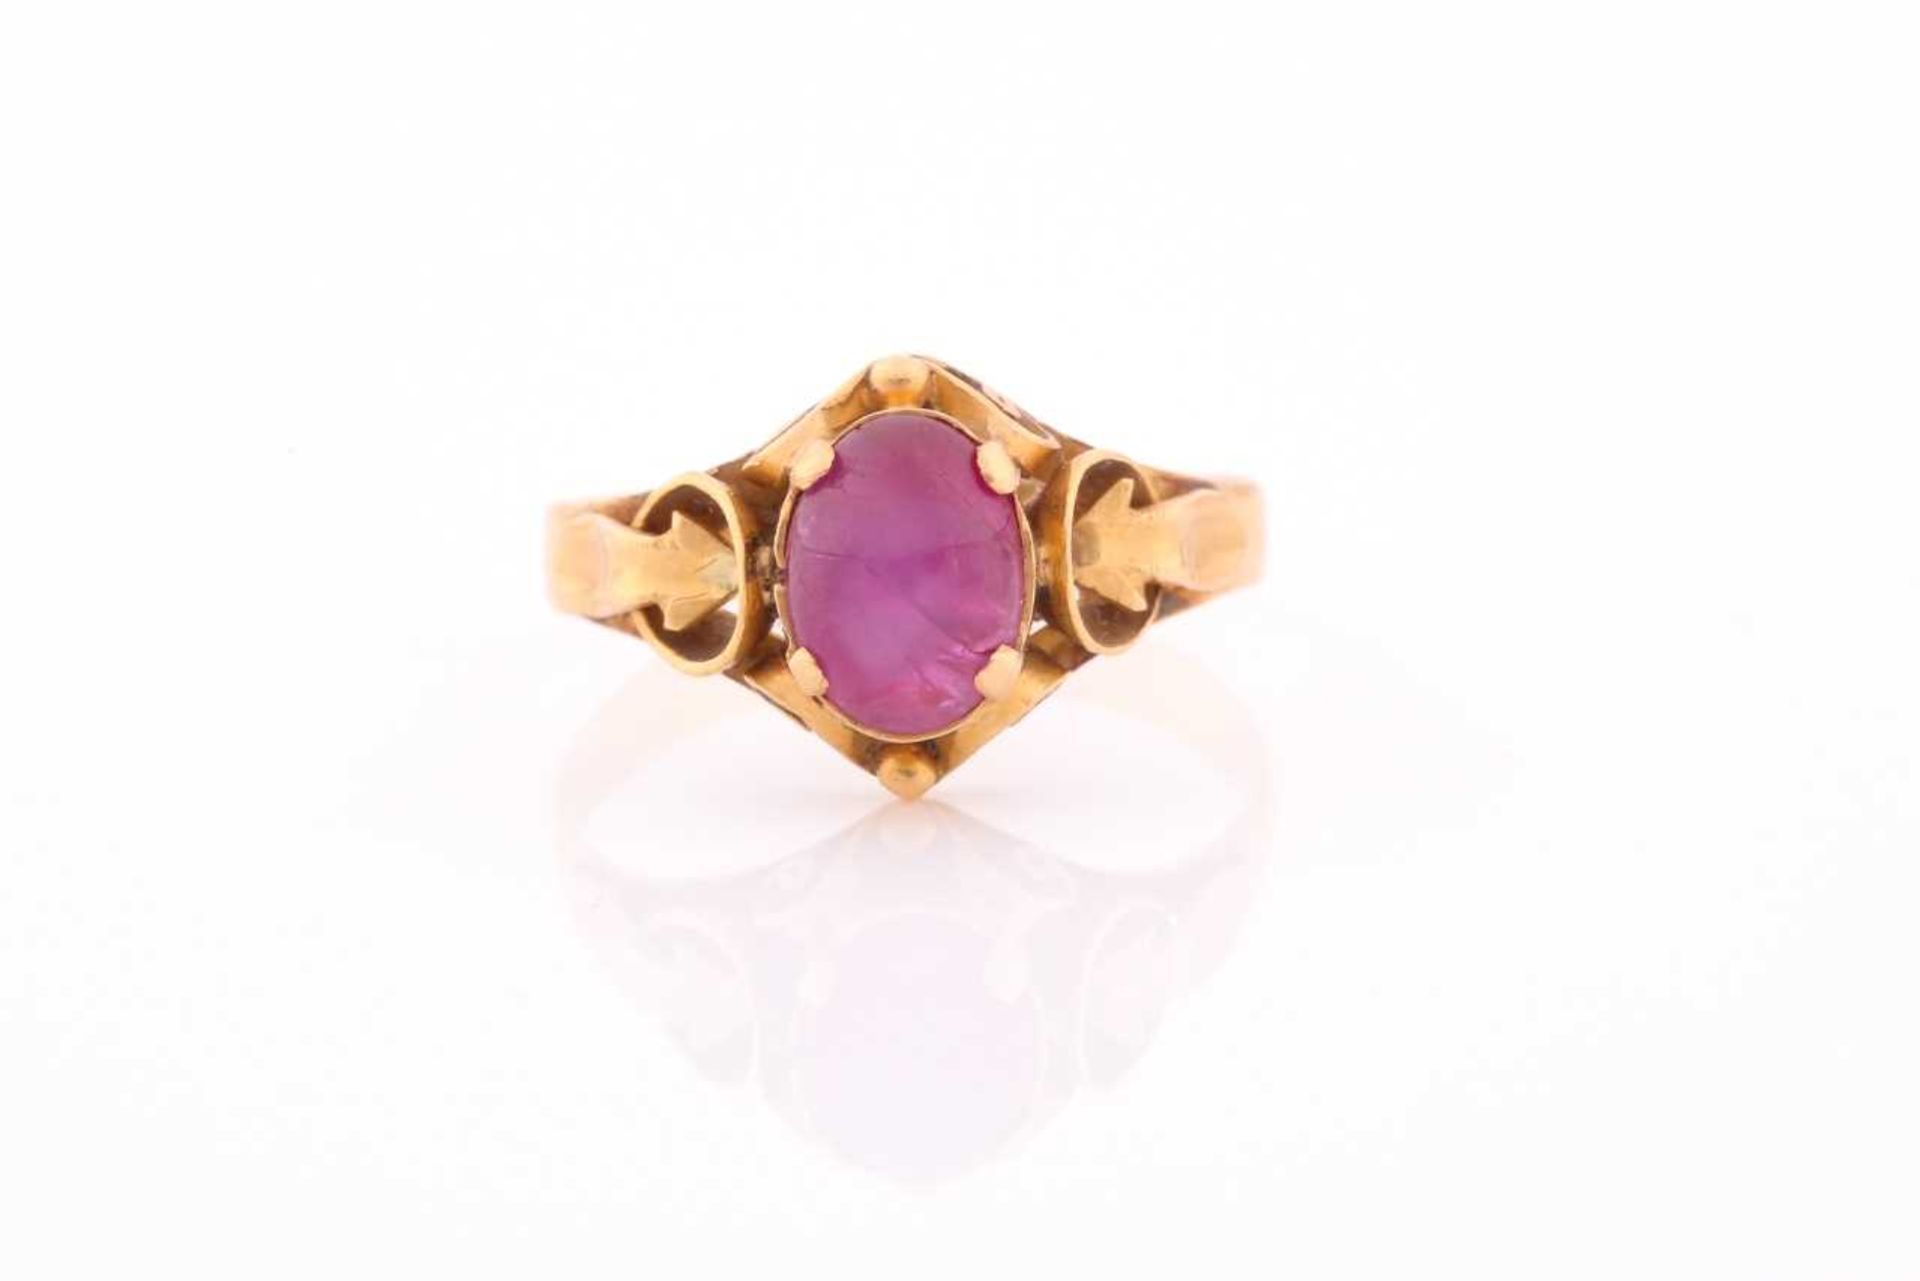 A yellow metal and ruby ring, set with a cabochon six-pointed star ruby, in an ornate antique-